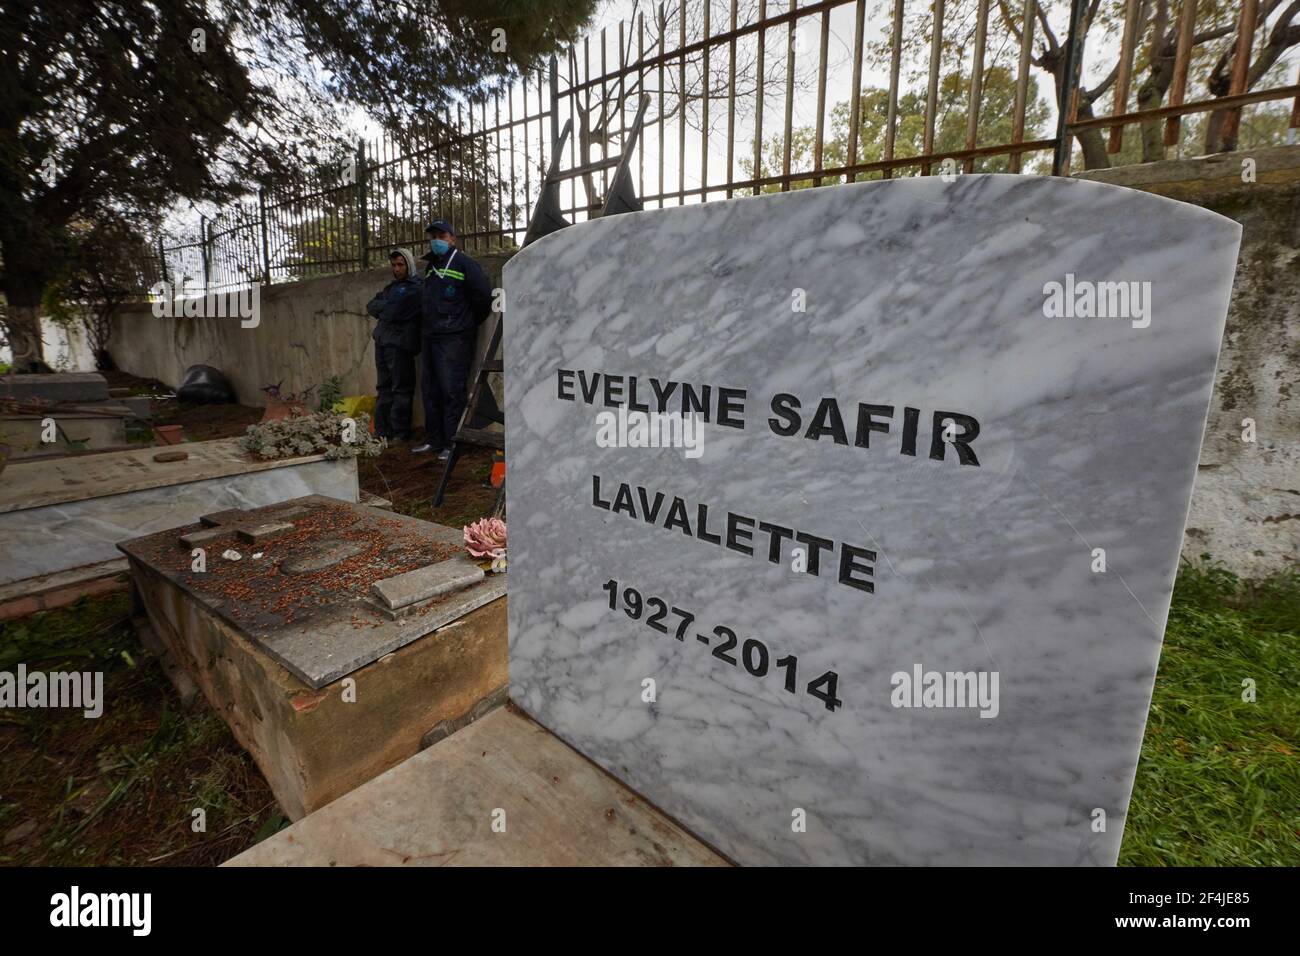 Funeral of the anti-colonialist activist Yvette Maillot, Algiers, Algeria, on March 21, 2021. Died on 20 March 2021 at the age of 94 in the Christian cemetery of Diar Essaada in El-Madania (Algiers). A native of Mostaganem in western Algeria, Yvette Maillot, known for her commitment and action for Algerian independence, belonged to a family of fervent militants and defenders of the national cause, the most famous of whom was her brother Henri Maillot, who was killed in action in 1956. Yvette Maillot was buried next to her brother Henri. Photo by Ammi Louiza/ABACAPRESS.COM Stock Photo